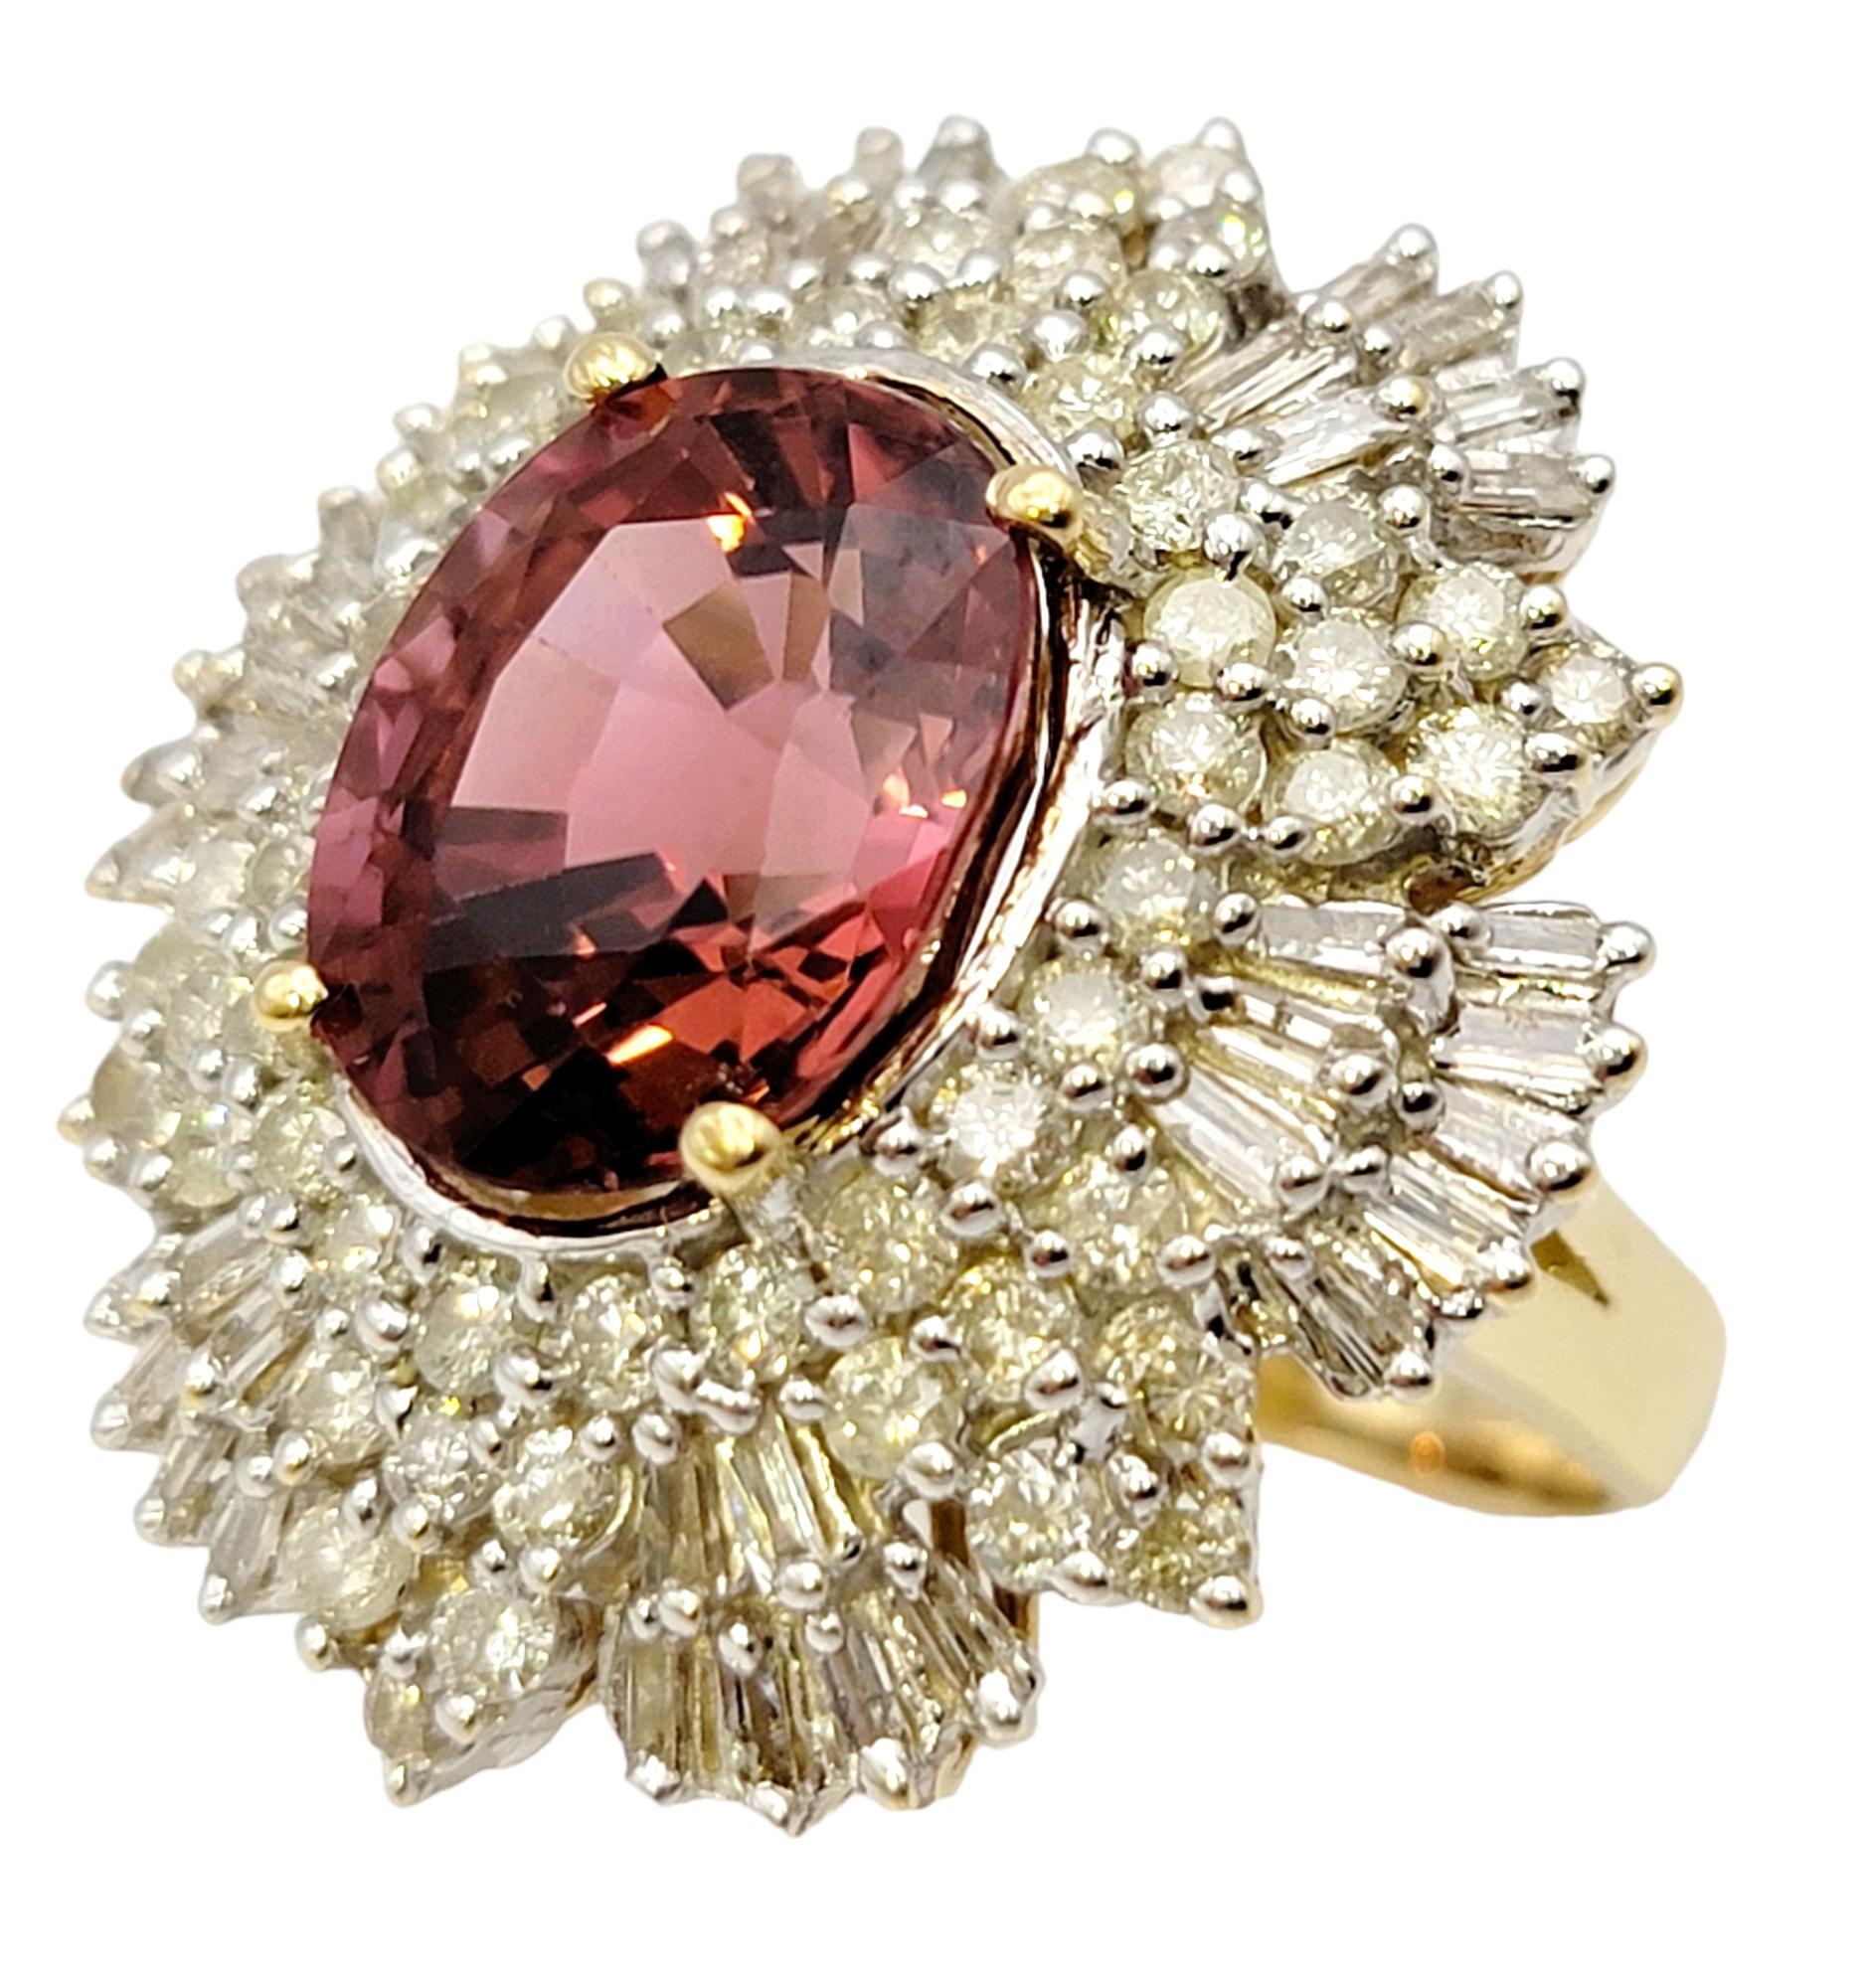 Ring size: 8.25

This stunningly sparkly diamond and pink tourmaline ring makes a sensational statement. The dazzling diamond detailing fills the finger, making it shimmer from every angle, while the bright pop of color from the pink tourmaline adds